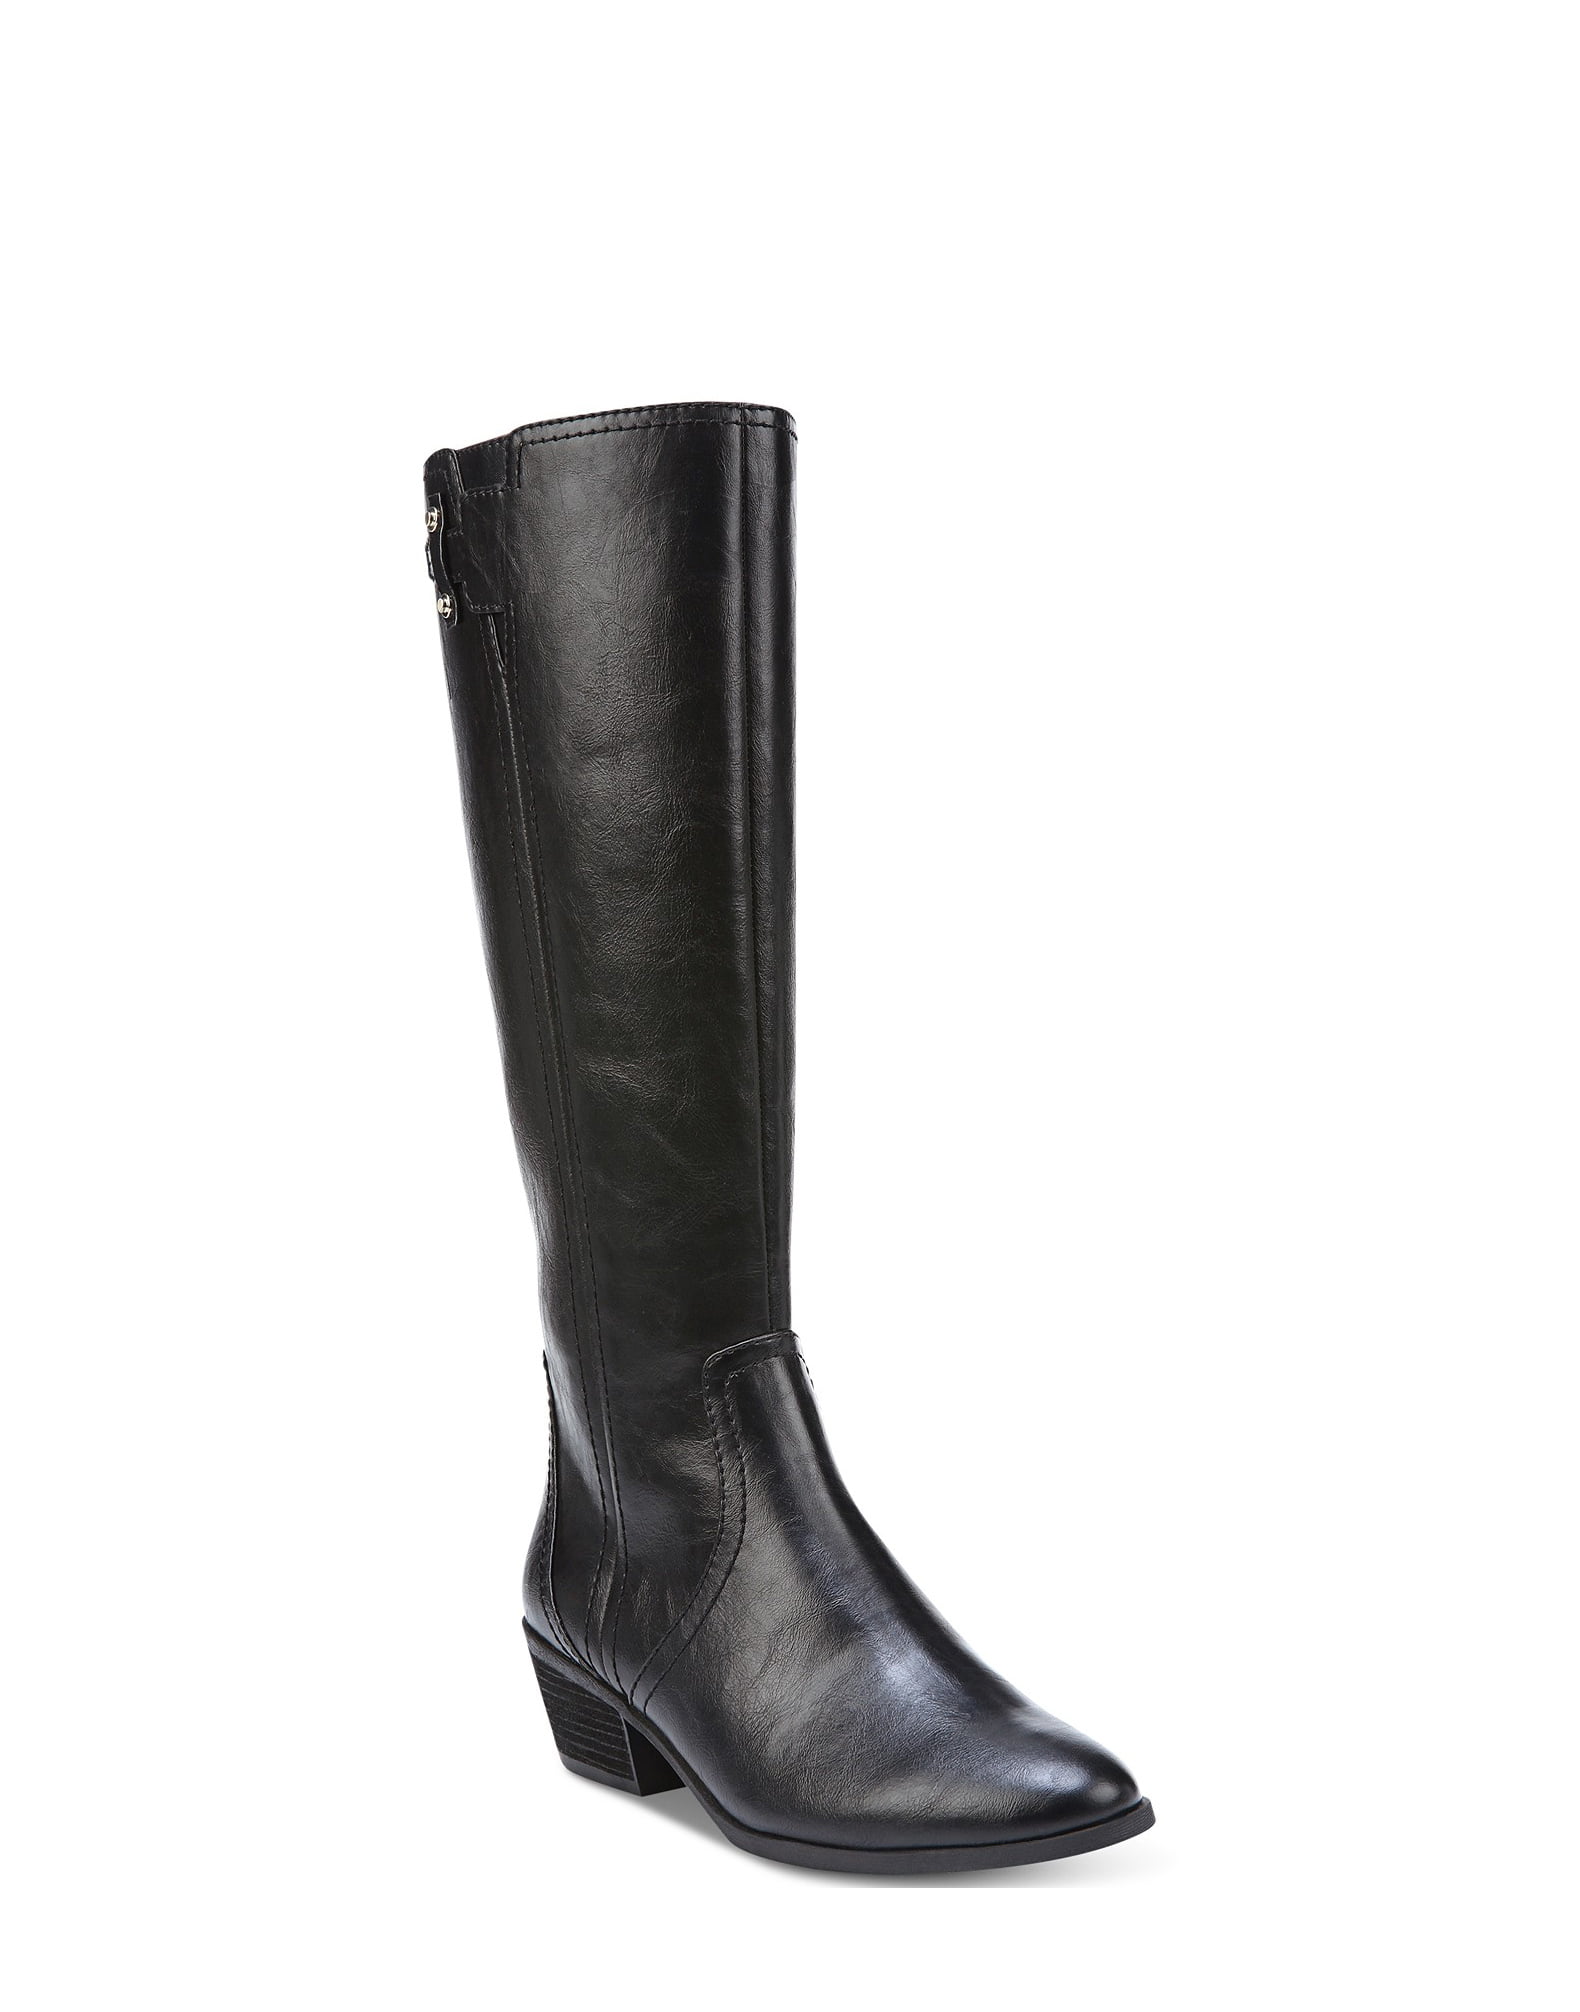 Dr. Scholl's Shoes - Dr. Scholl's | Brilliance Knee High Boots | Black ...